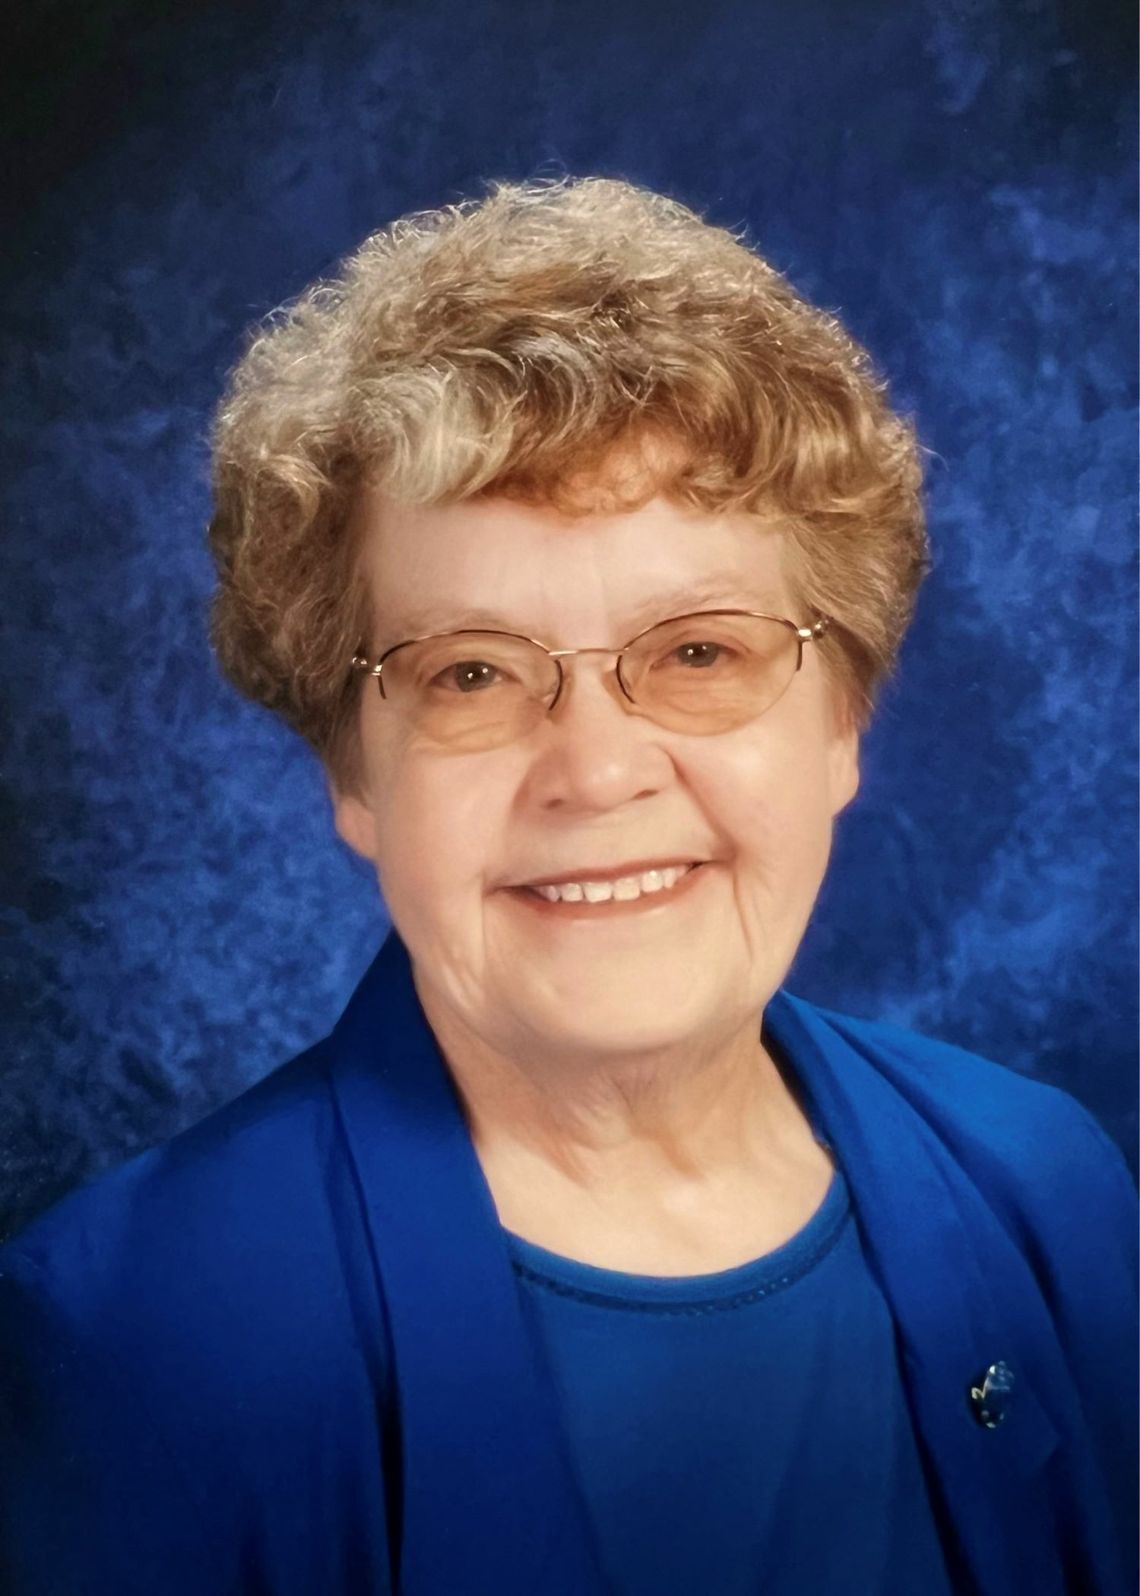 Obituary - Wilma Helen Taylor Miers